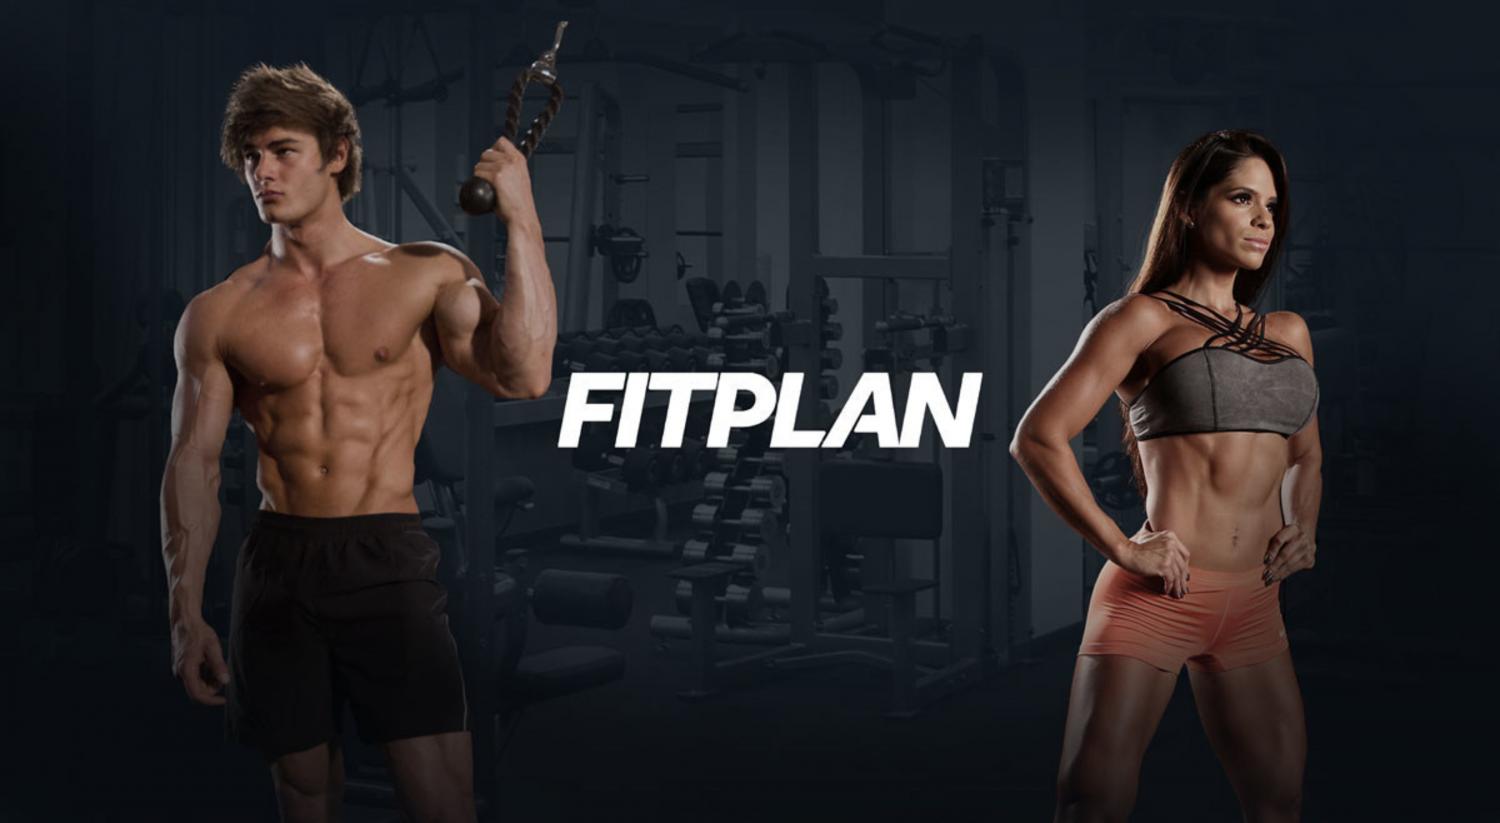 For many, one New Year’s resolution is to begin exercising more consistently. According to “Fitplan,” exercising is ten times easier for users to start because the workouts are right at your fingertips, while both fast and free.  Rating: BPhoto Credit: Fitplan